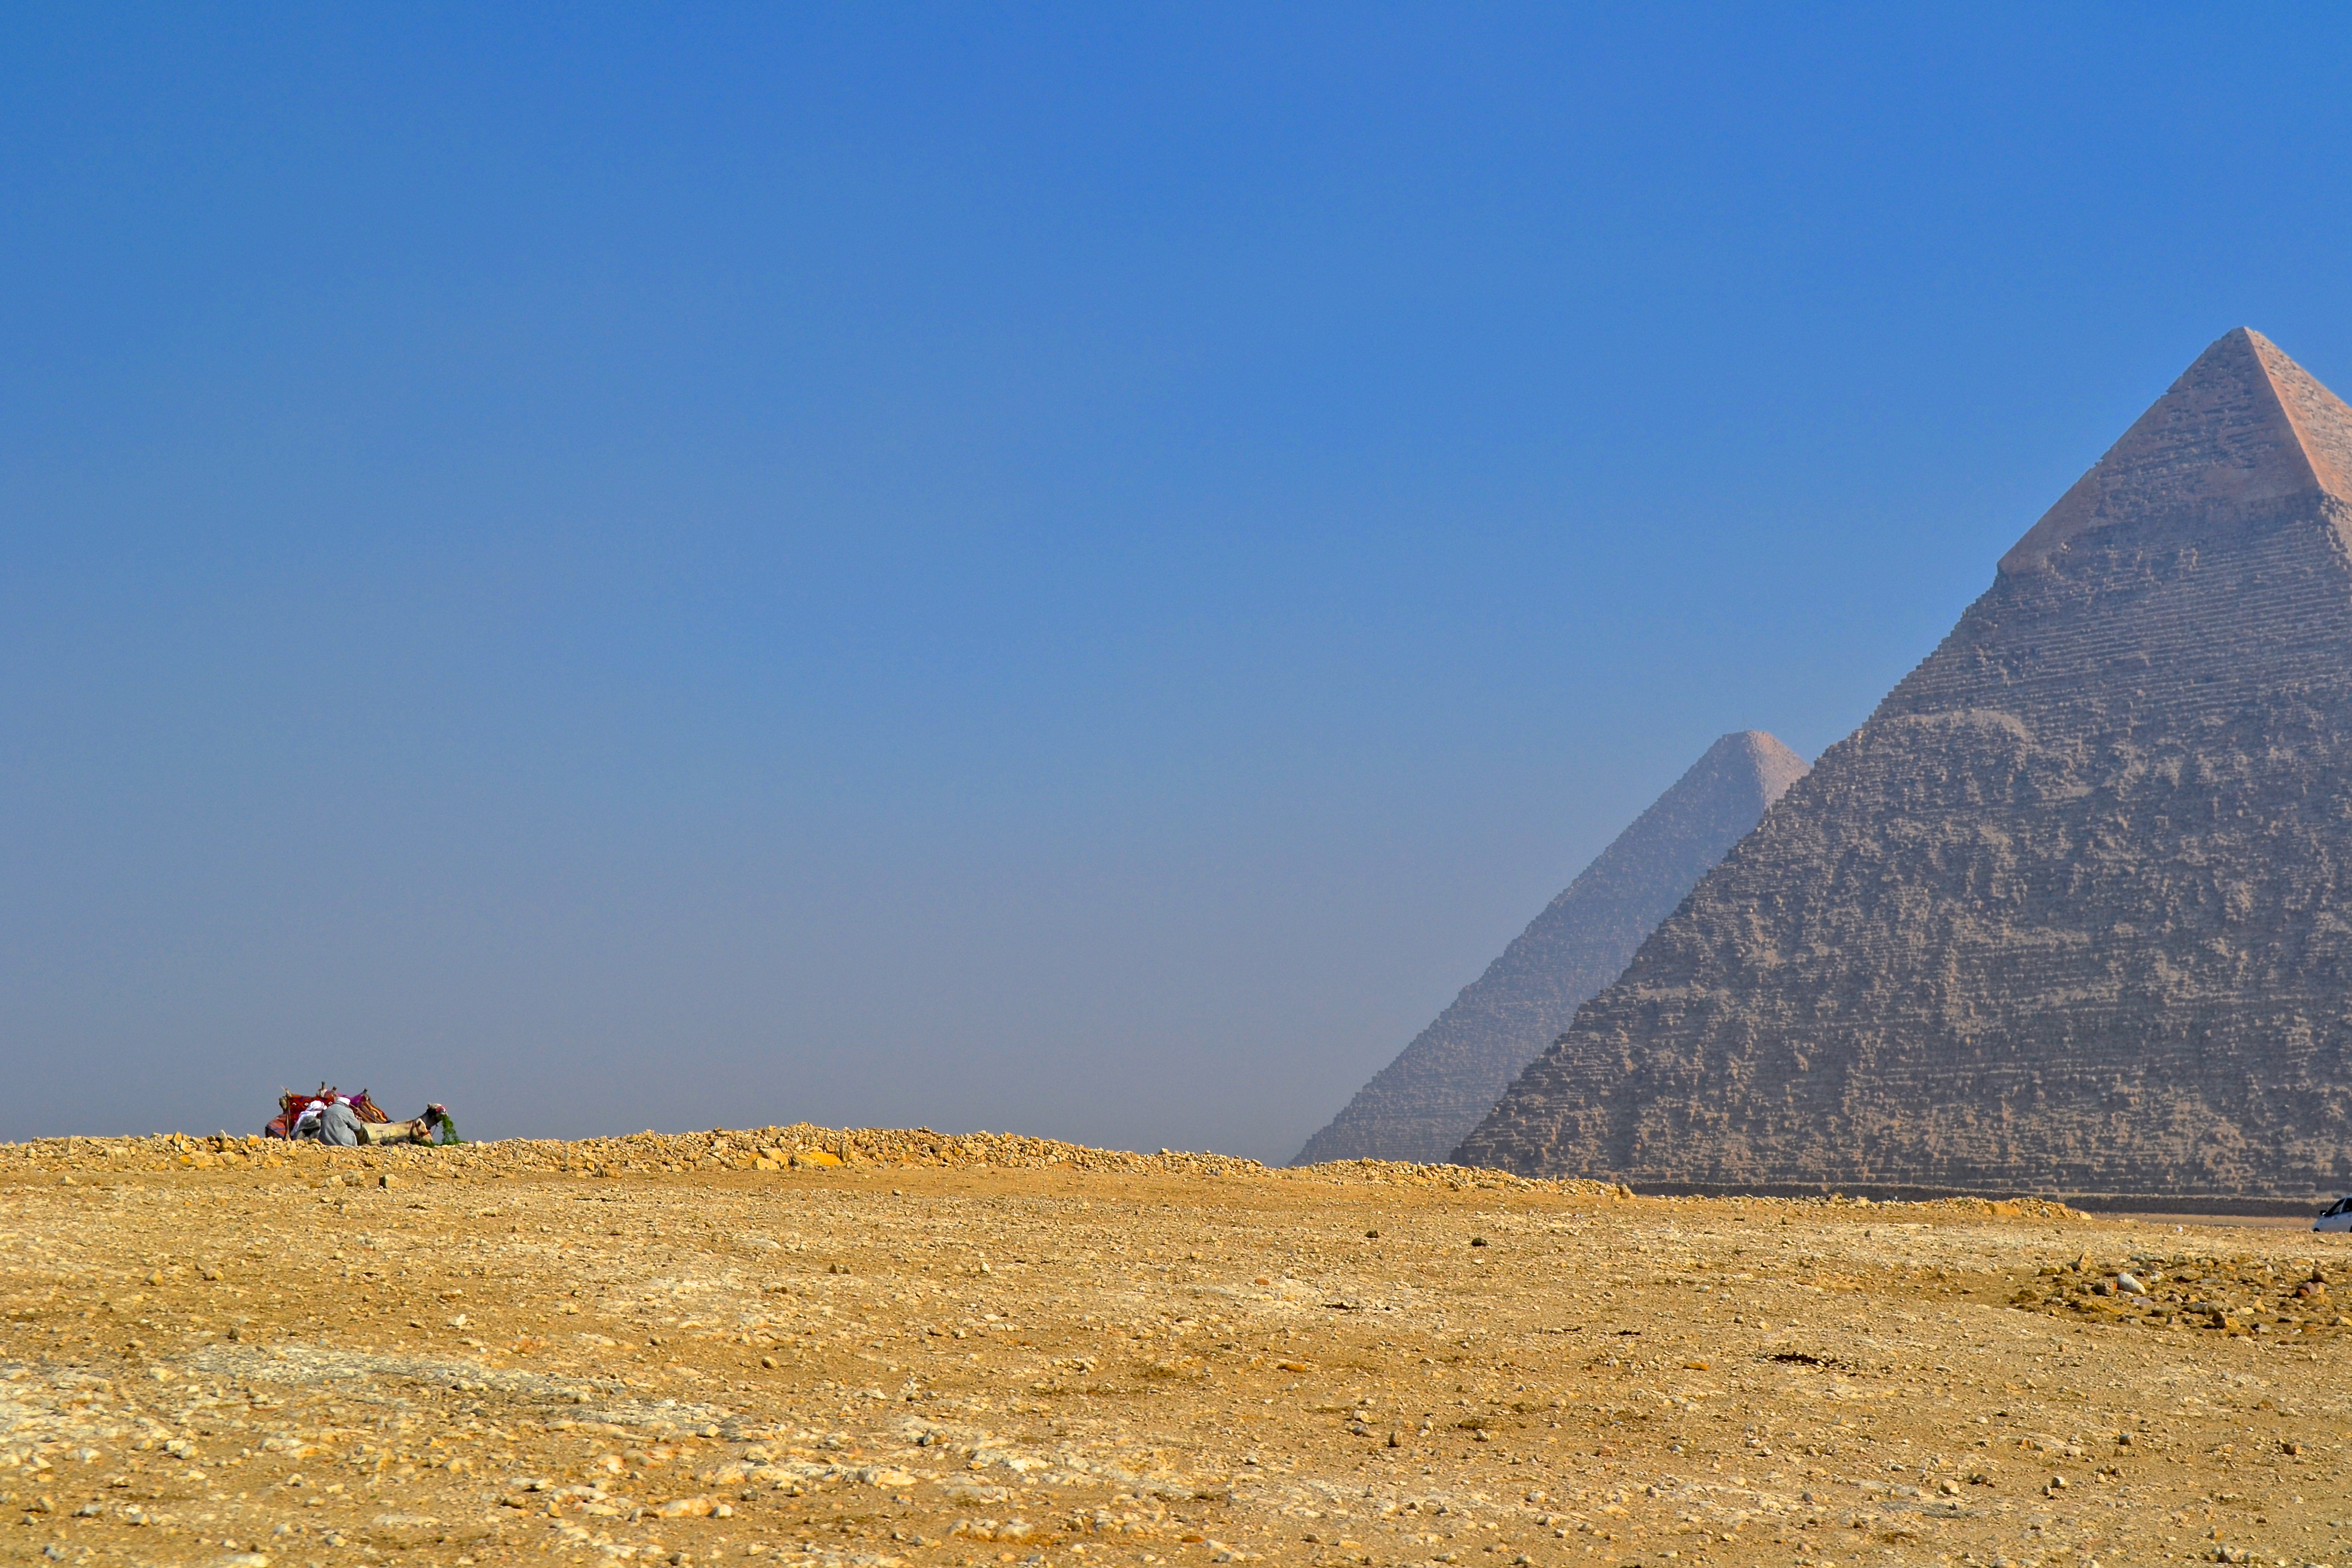 The Pyramids of Giza: the only remaining ancient world wonder.